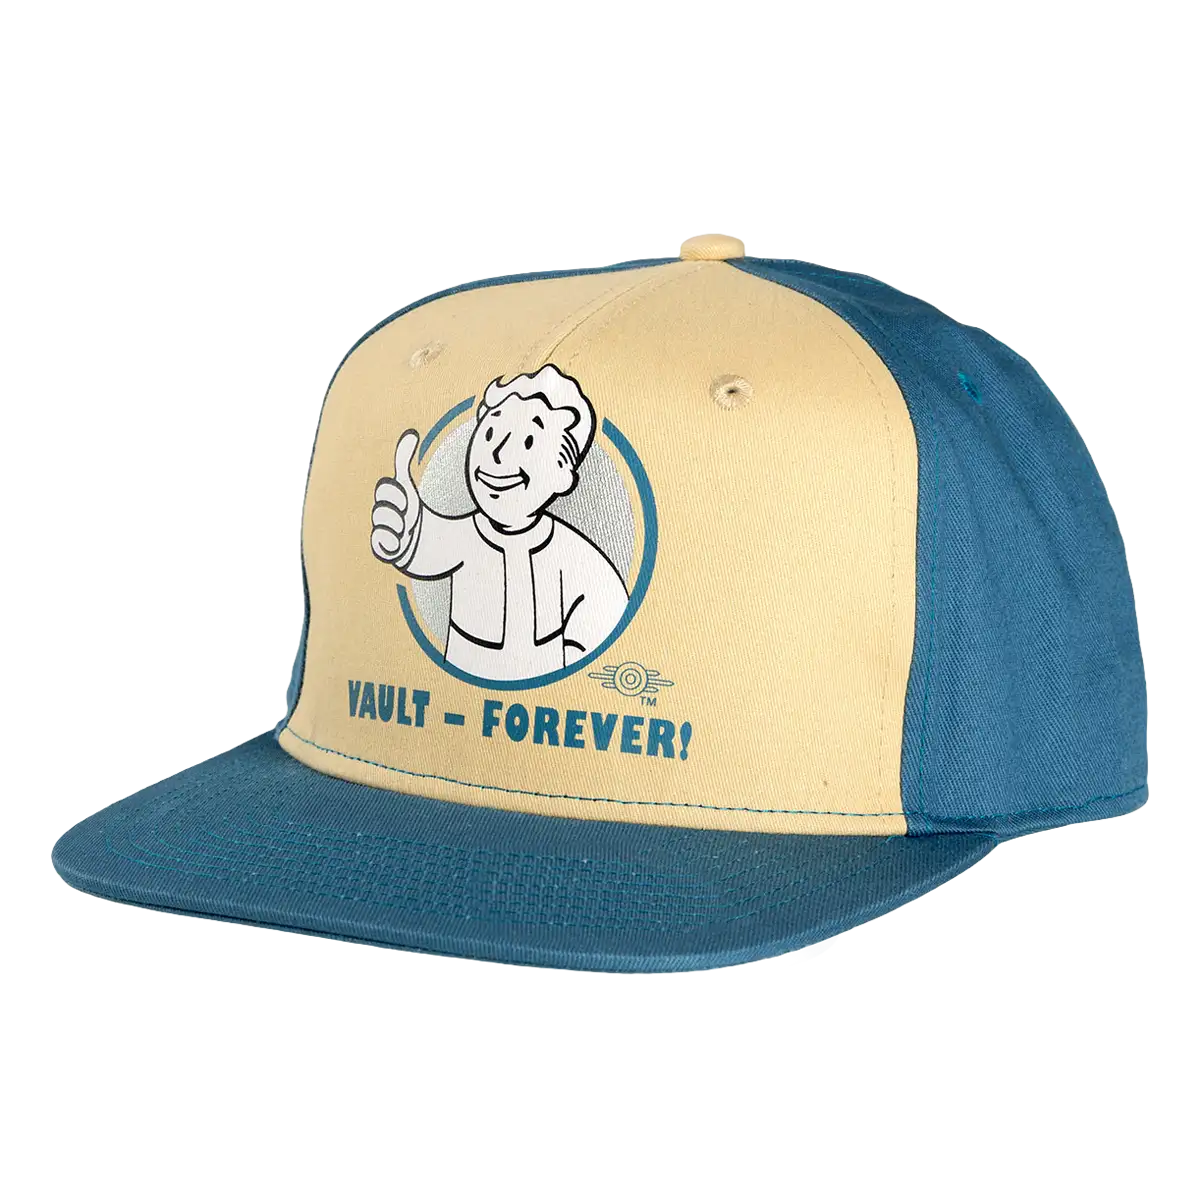 Fallout Snapback Cap "Vault Forever"